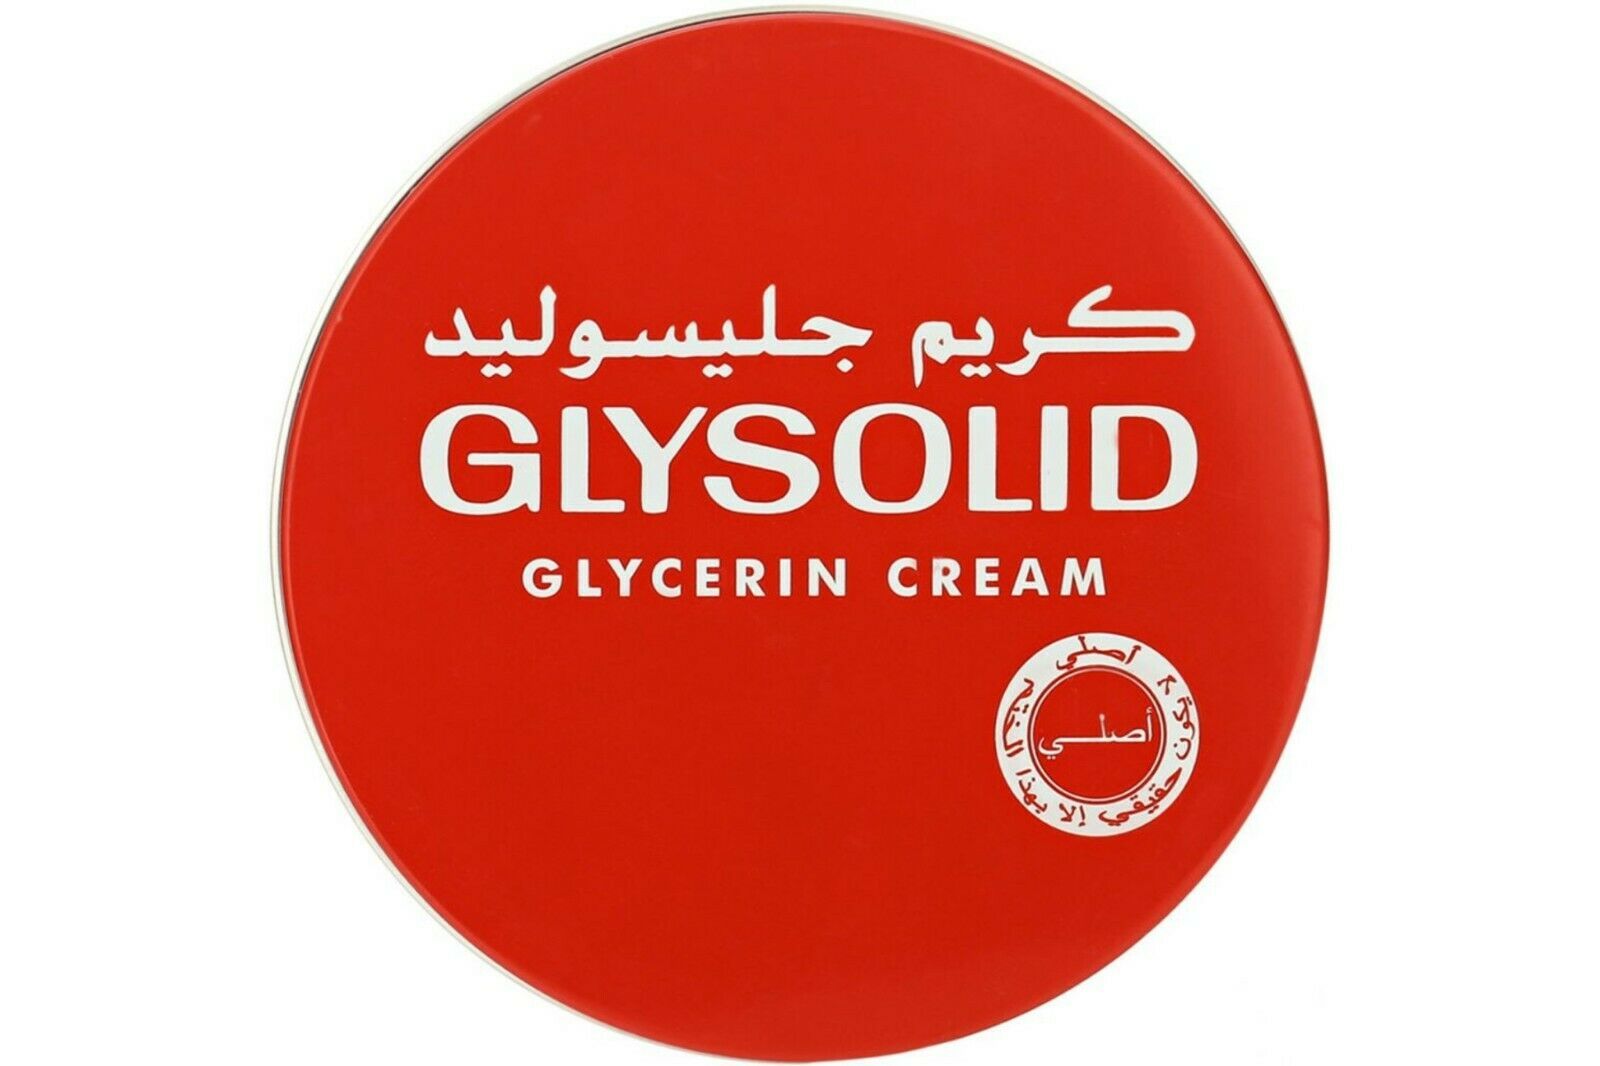 GLYSOLID CREAM Face Moisturizers Dry Skin Feet Hands Body Soften With GLYCERIN